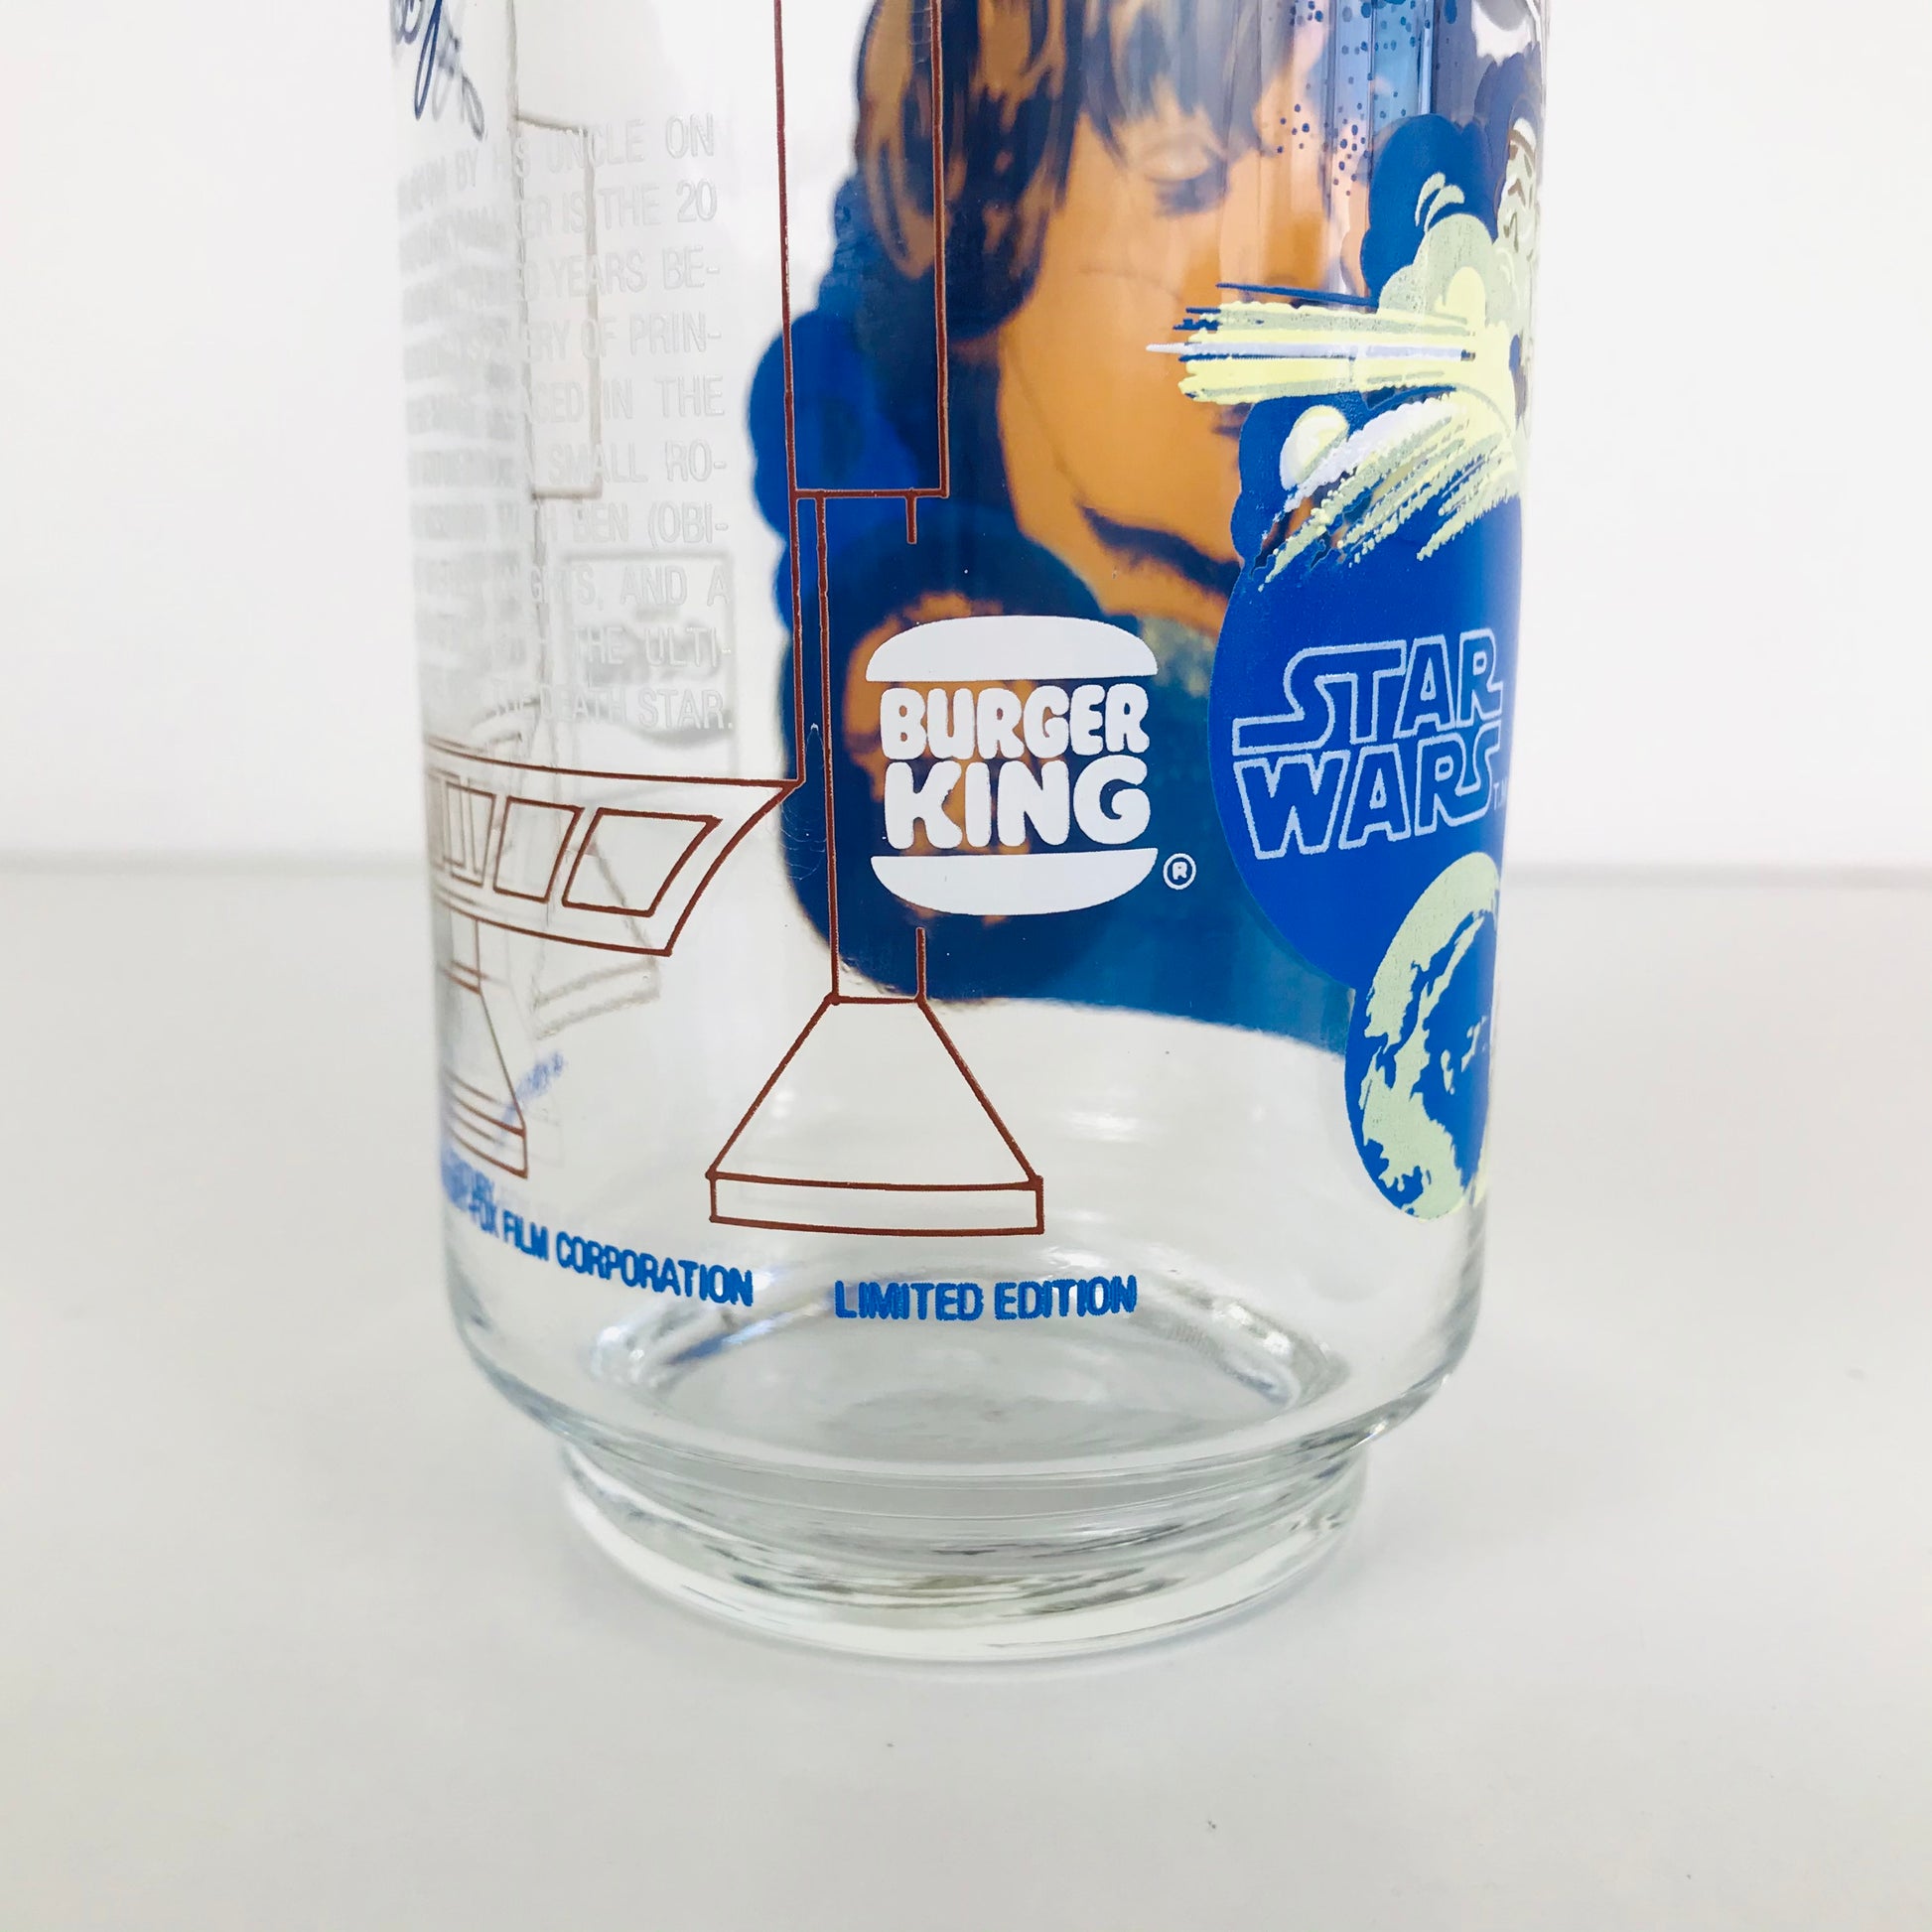 1 of 4 limited edition 1977 Star Wars glass tumblers (with a Burger King logo on the side).